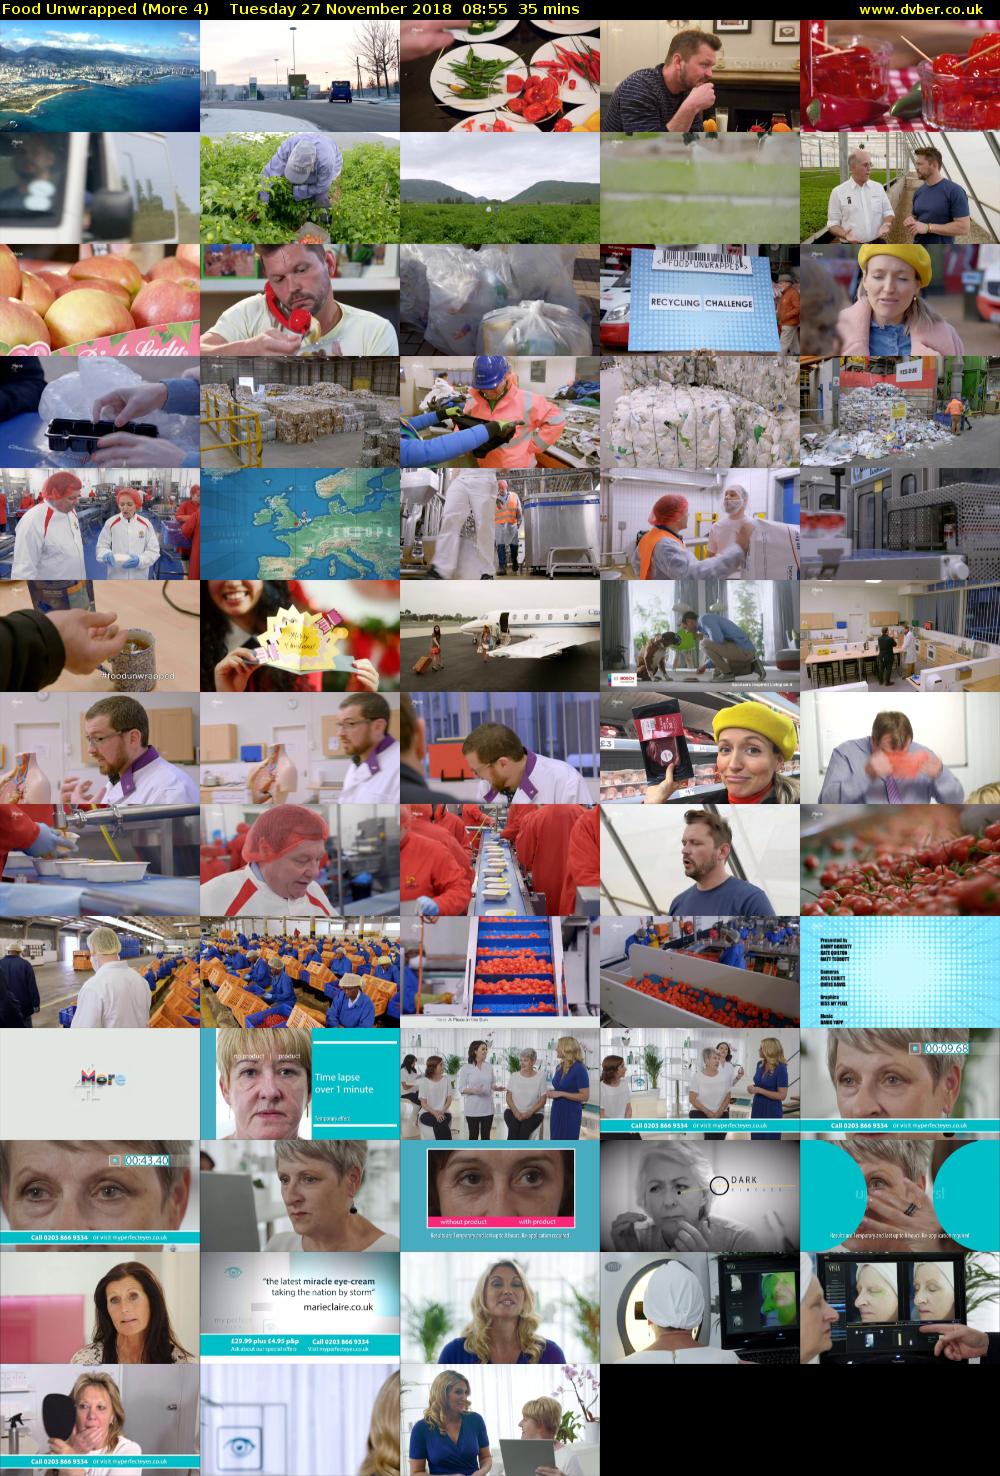 Food Unwrapped (More 4) Tuesday 27 November 2018 08:55 - 09:30